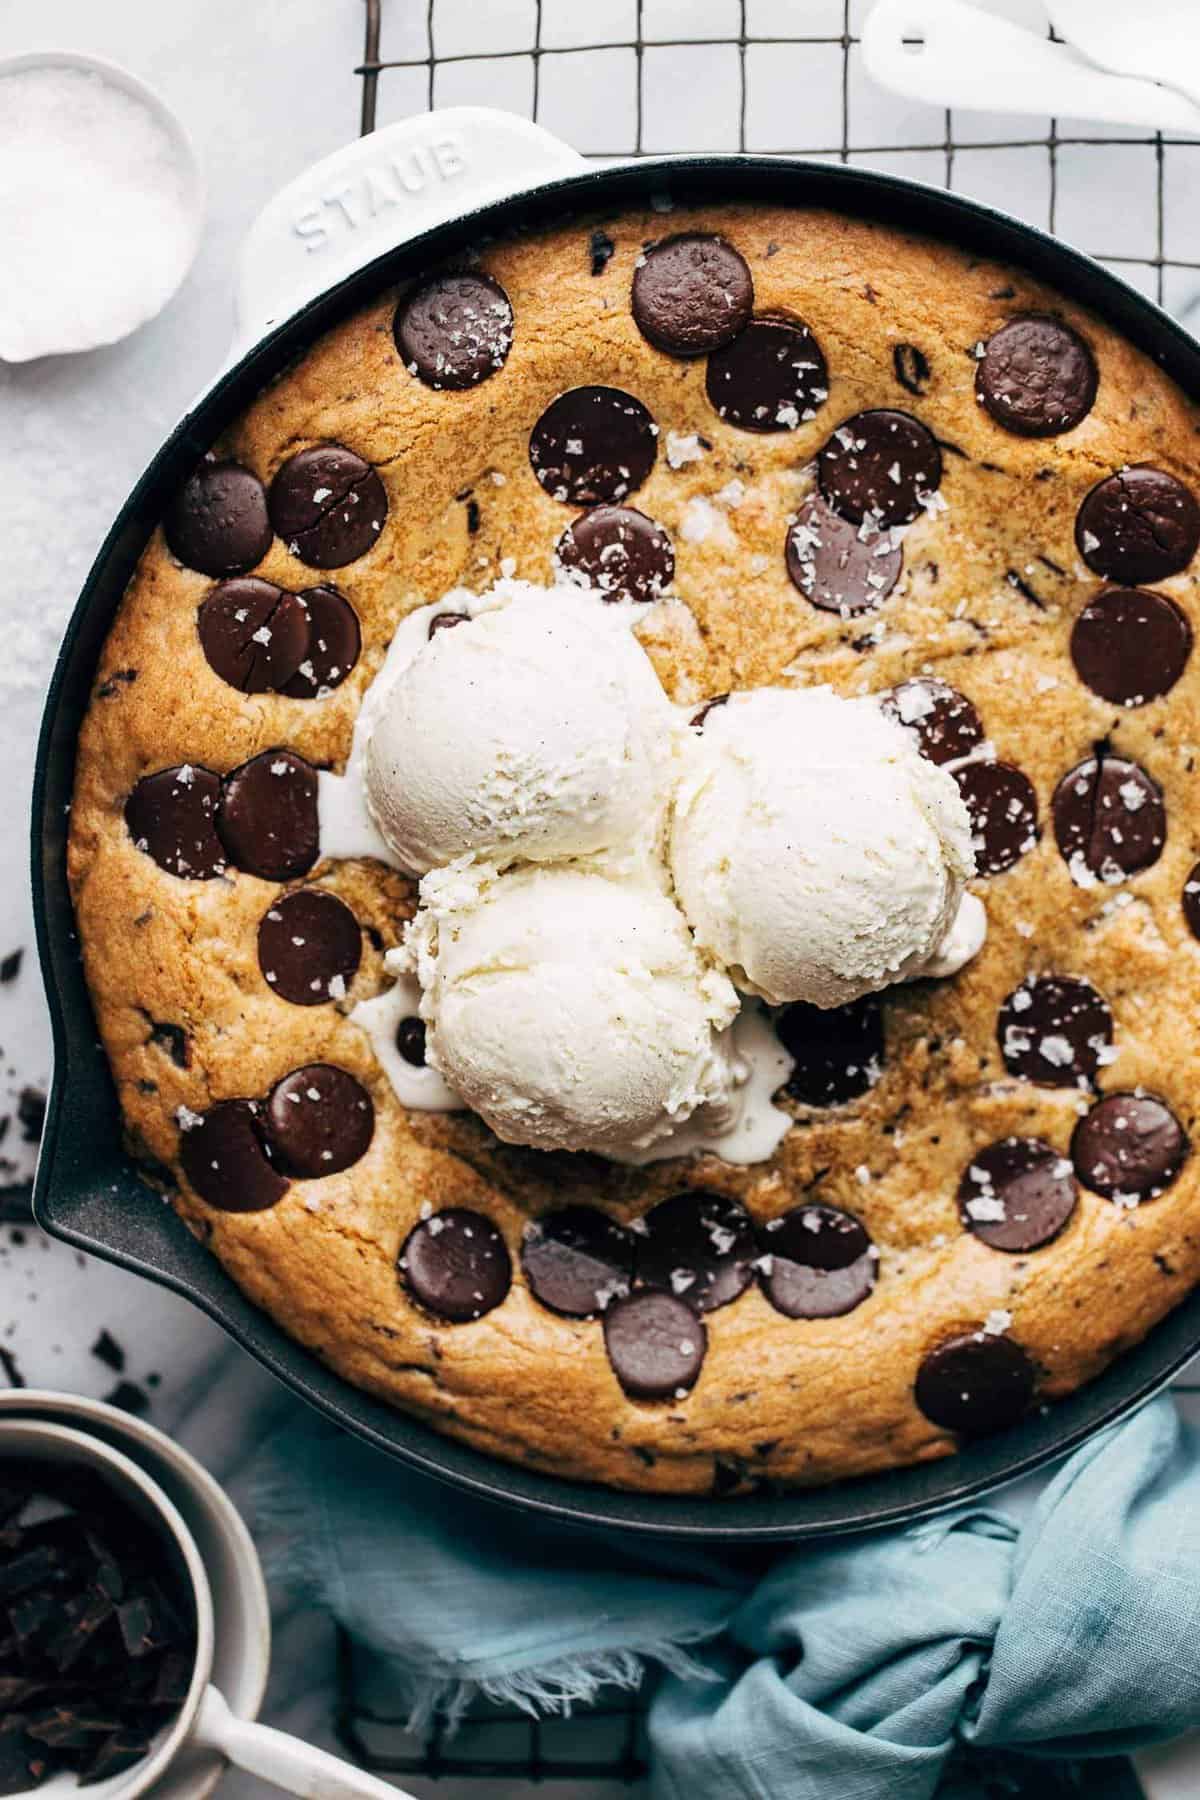 https://butternutbakeryblog.com/wp-content/uploads/2021/08/skillet-cookie-with-ice-cream.jpg